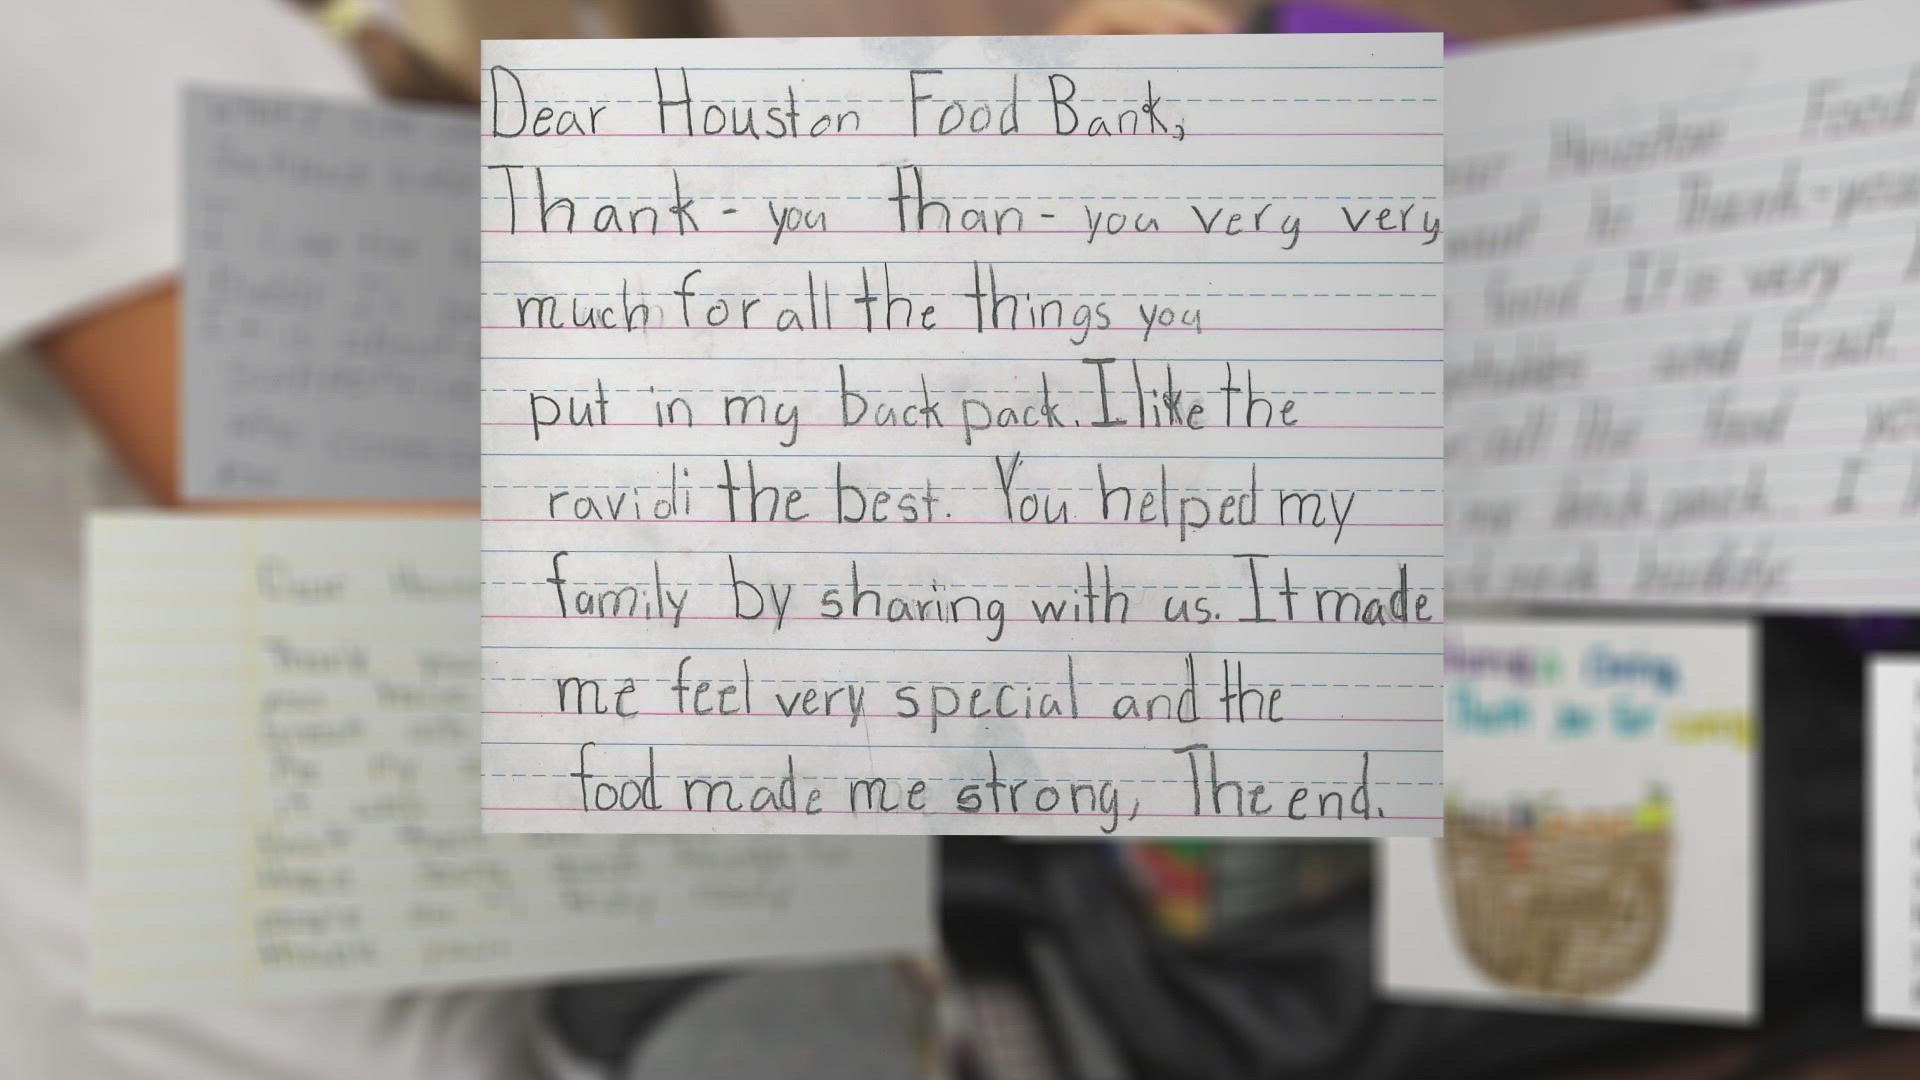 There's still time left to join us by helping the Houston Food Bank provide nutritious weekend meals for kids who depend on free school meals during the week.